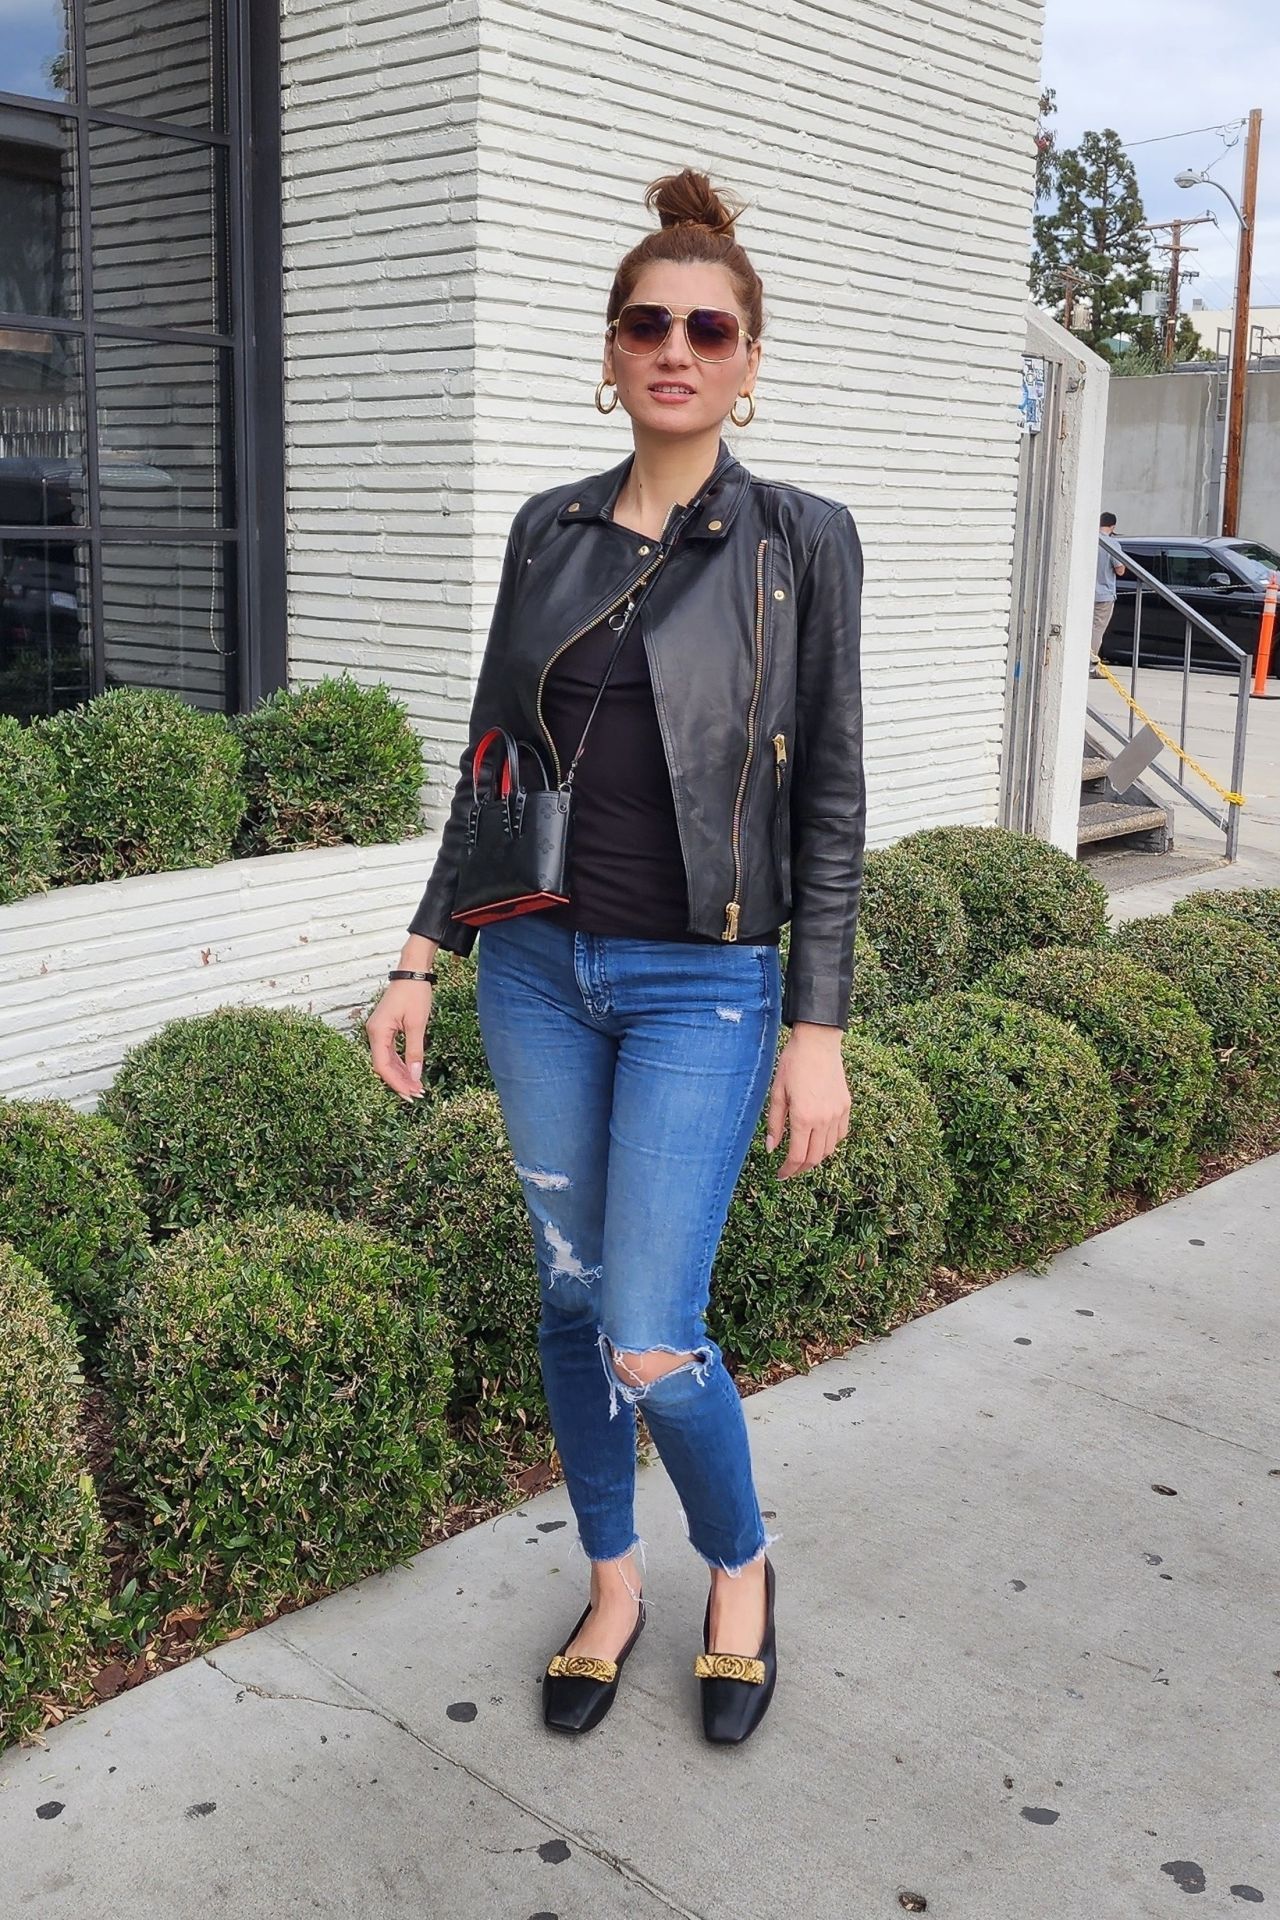 Blanca Blanco in black leather jacket at Gracias Madre 4